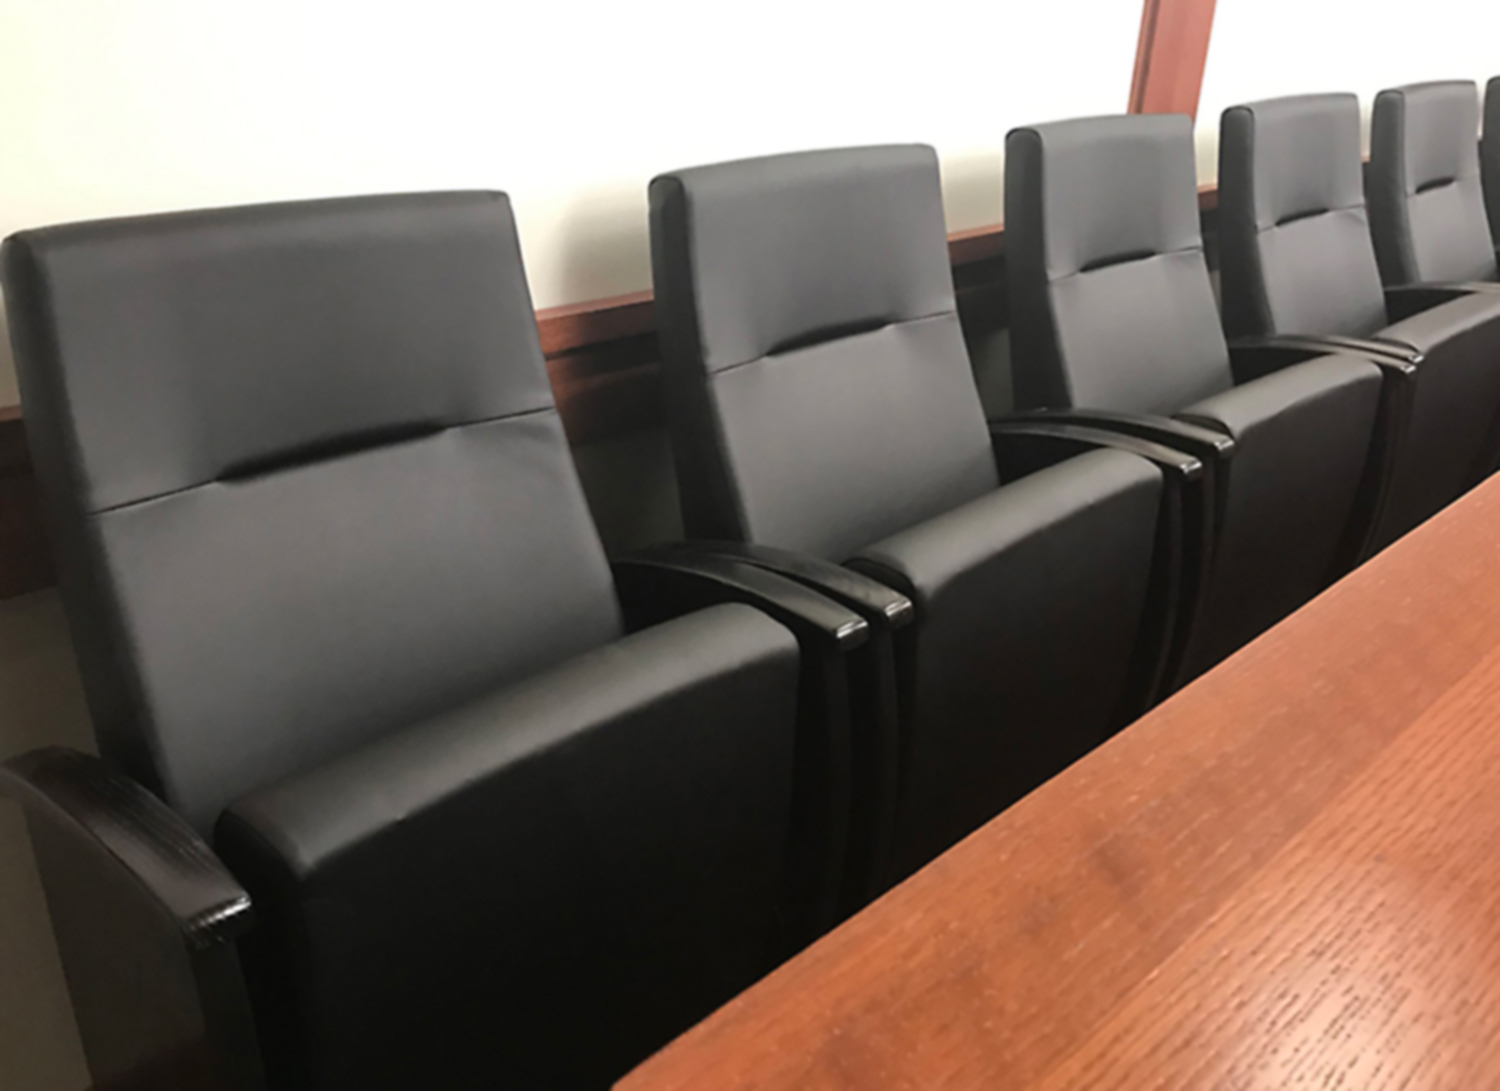 Clarity Back Jury Seats in Clarence Mitchell Courthouse - Baltimore, MD